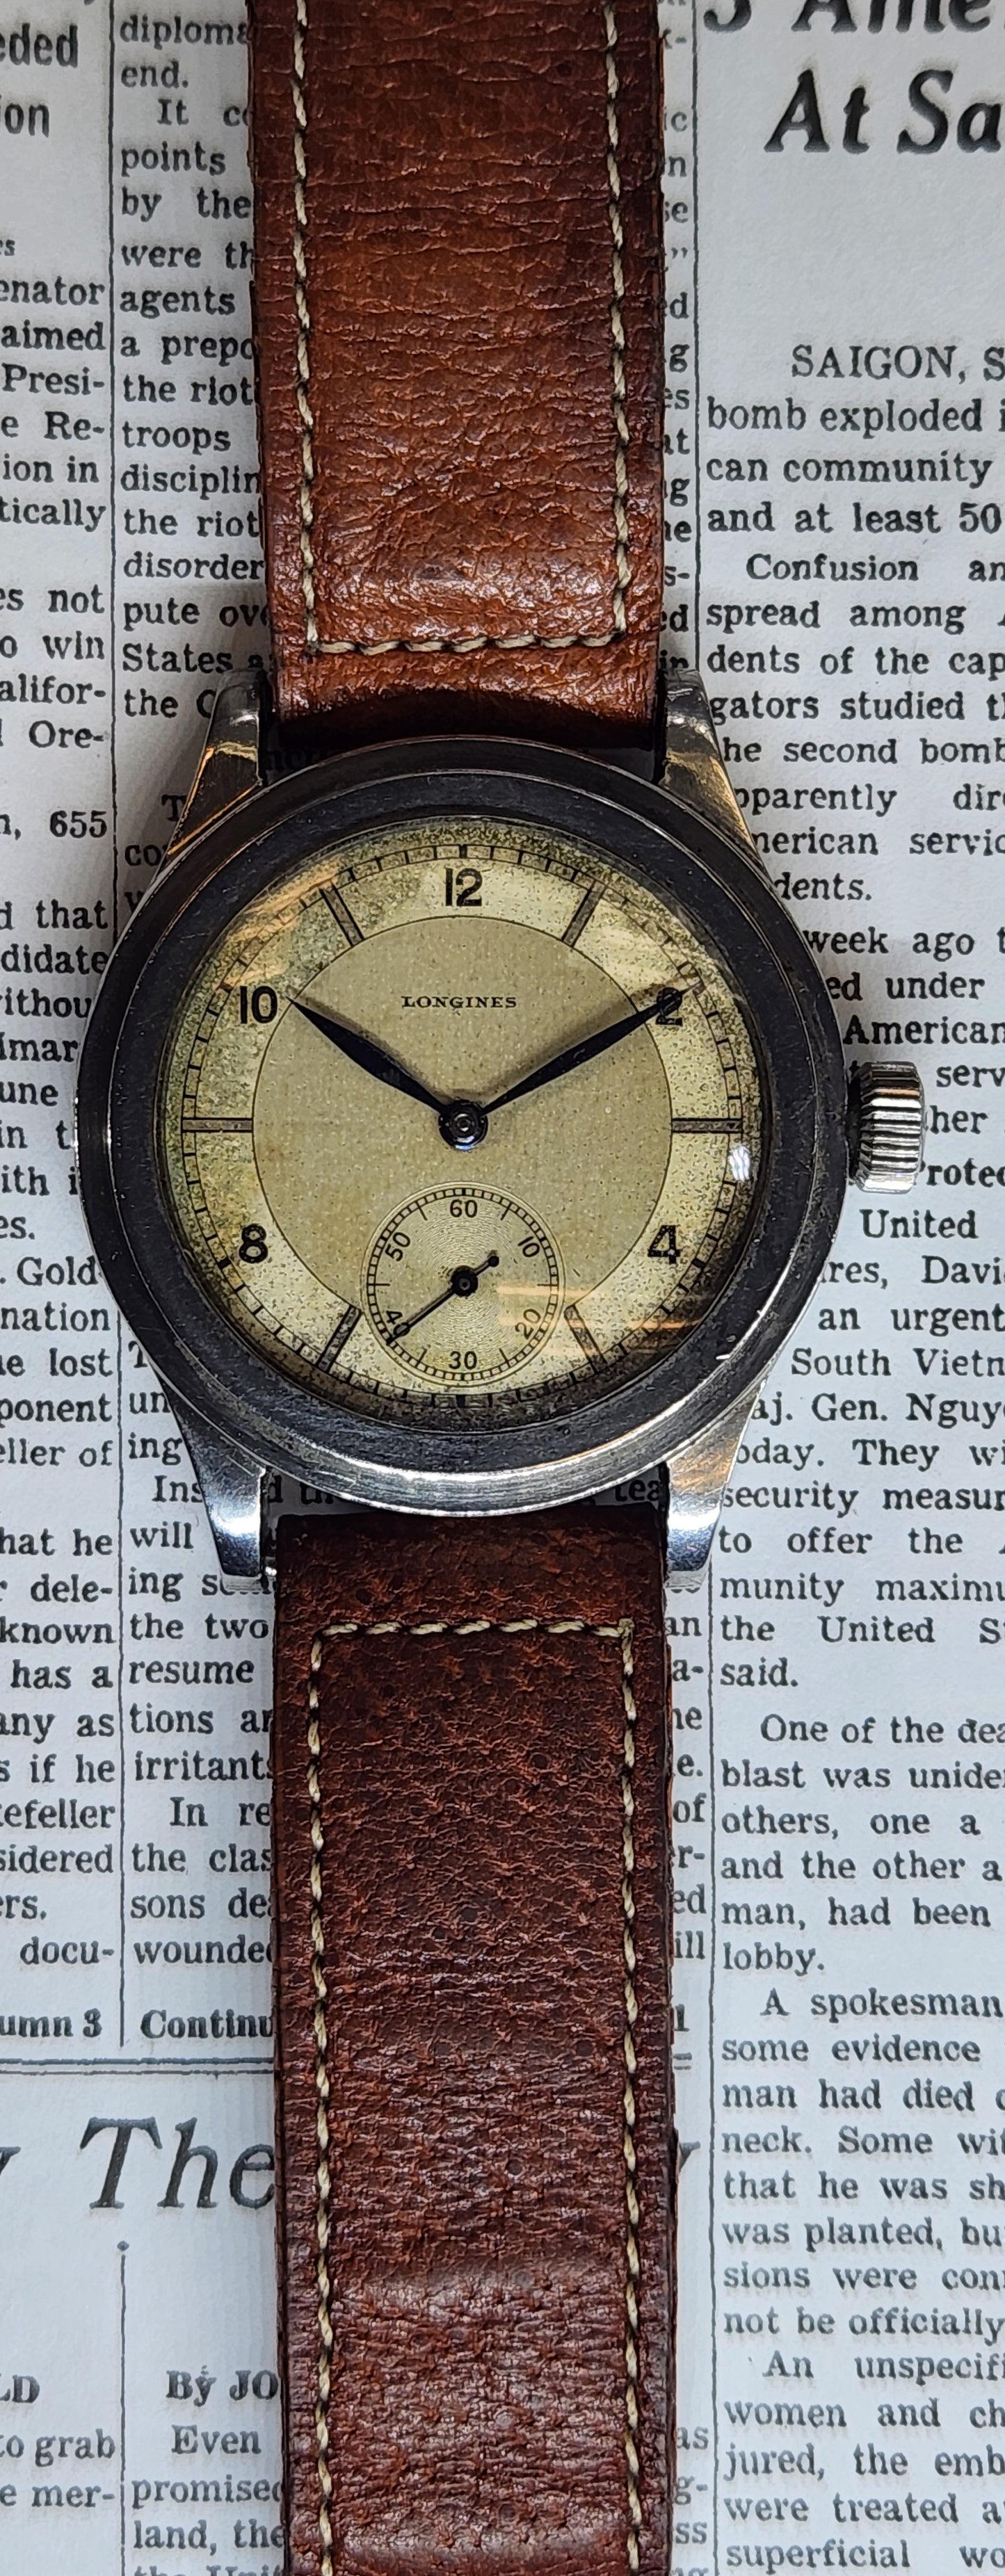 Longines Tre Tacche Ref 3864 from the 1940s